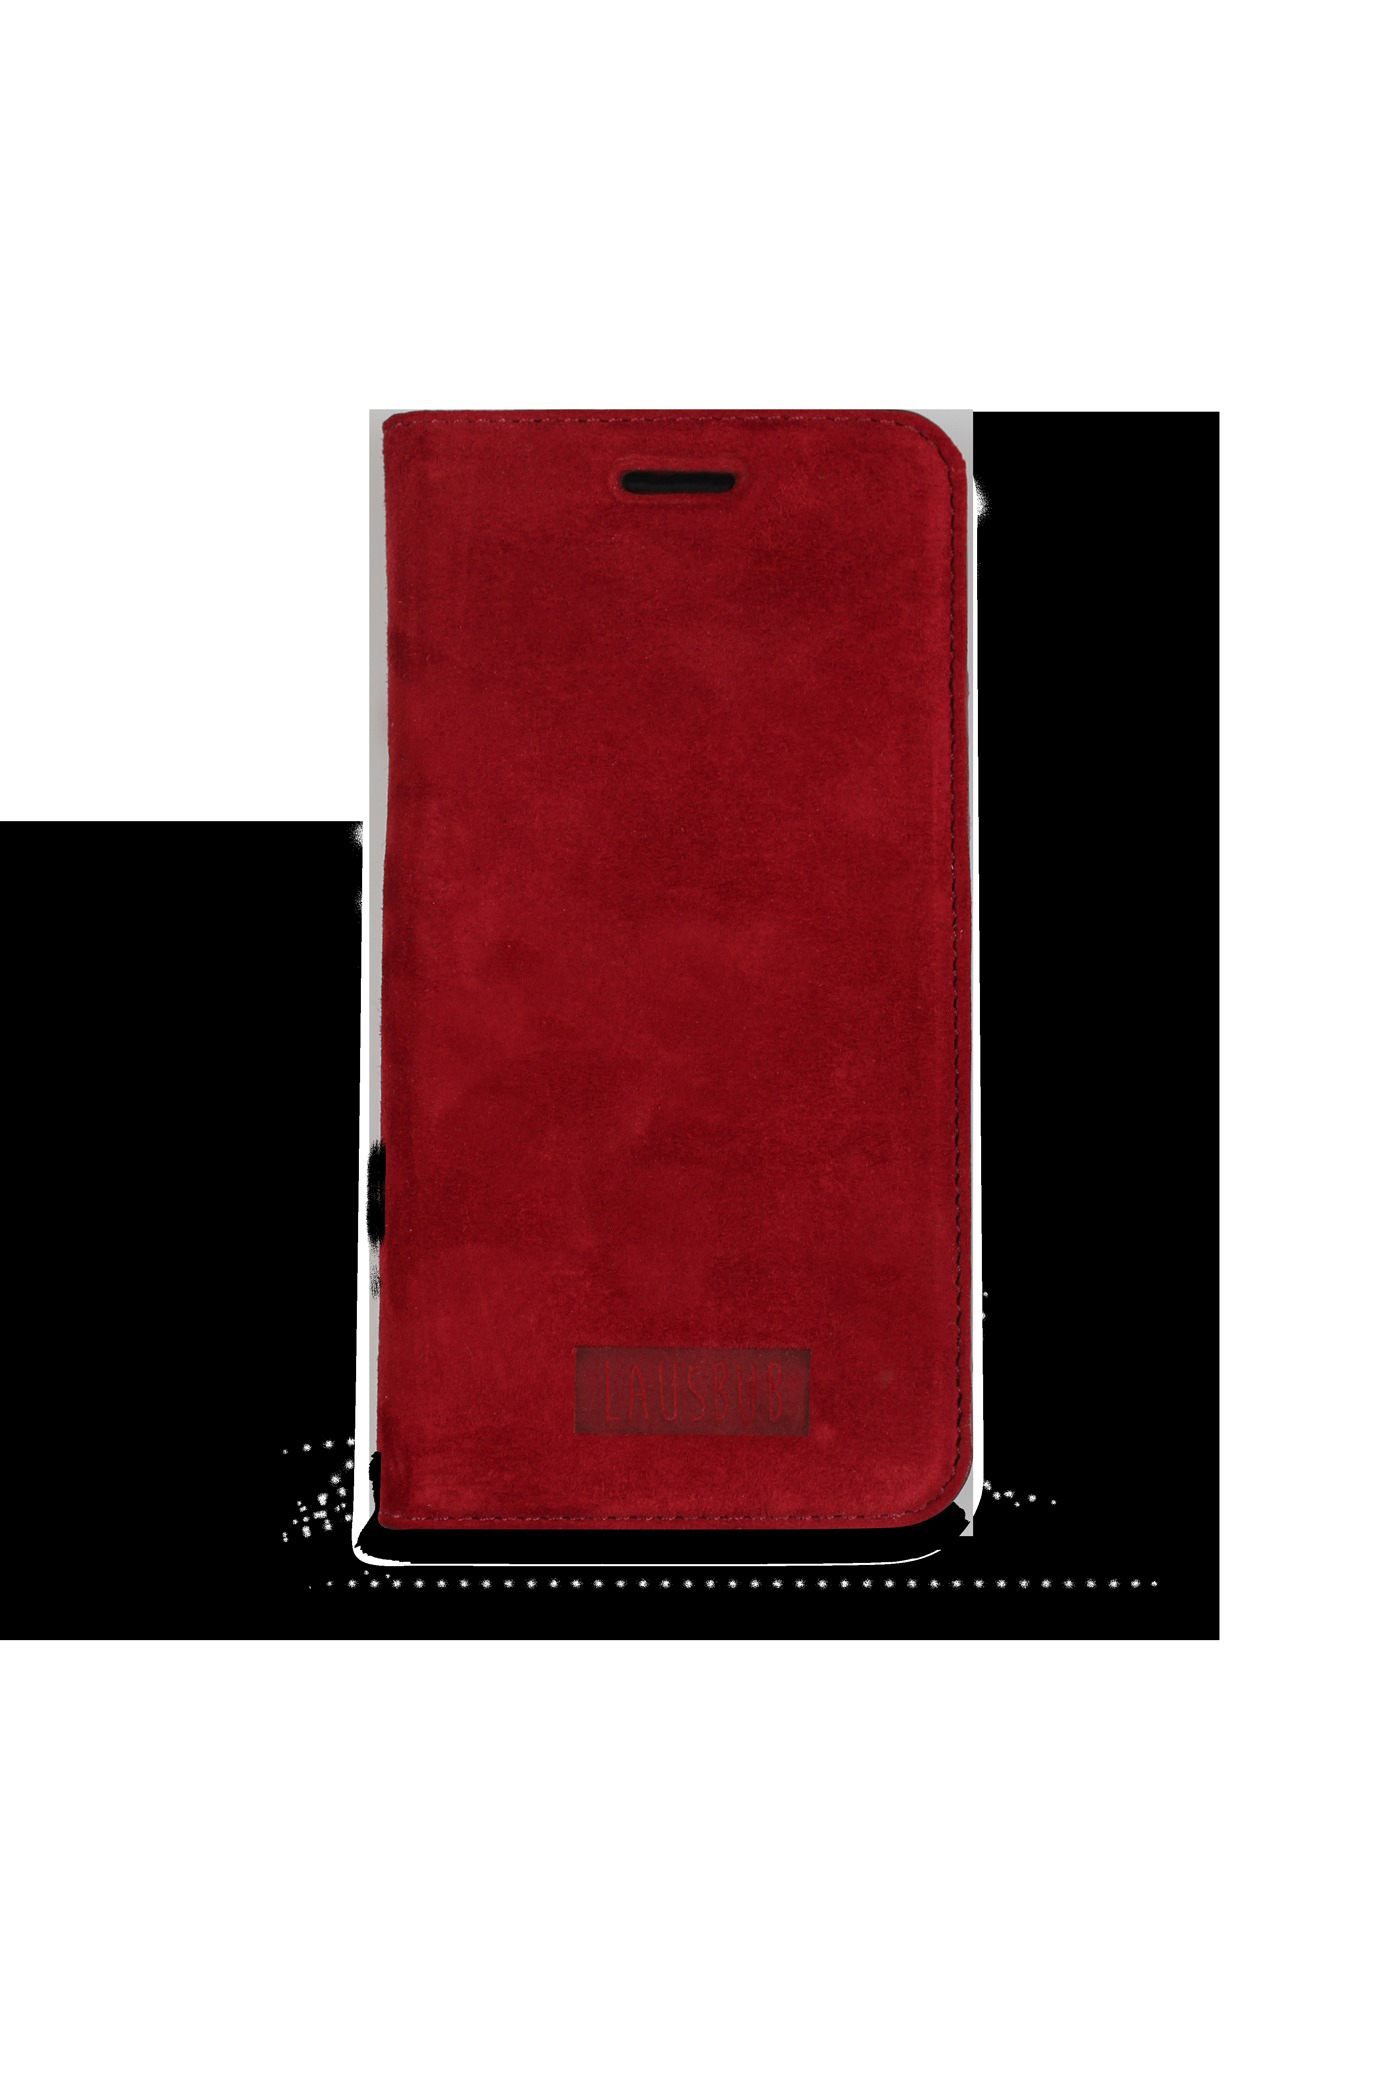 LAUSBUB Frechdachs, Bookcover, Apple, iPhone 6s, Tender Red 6, iPhone